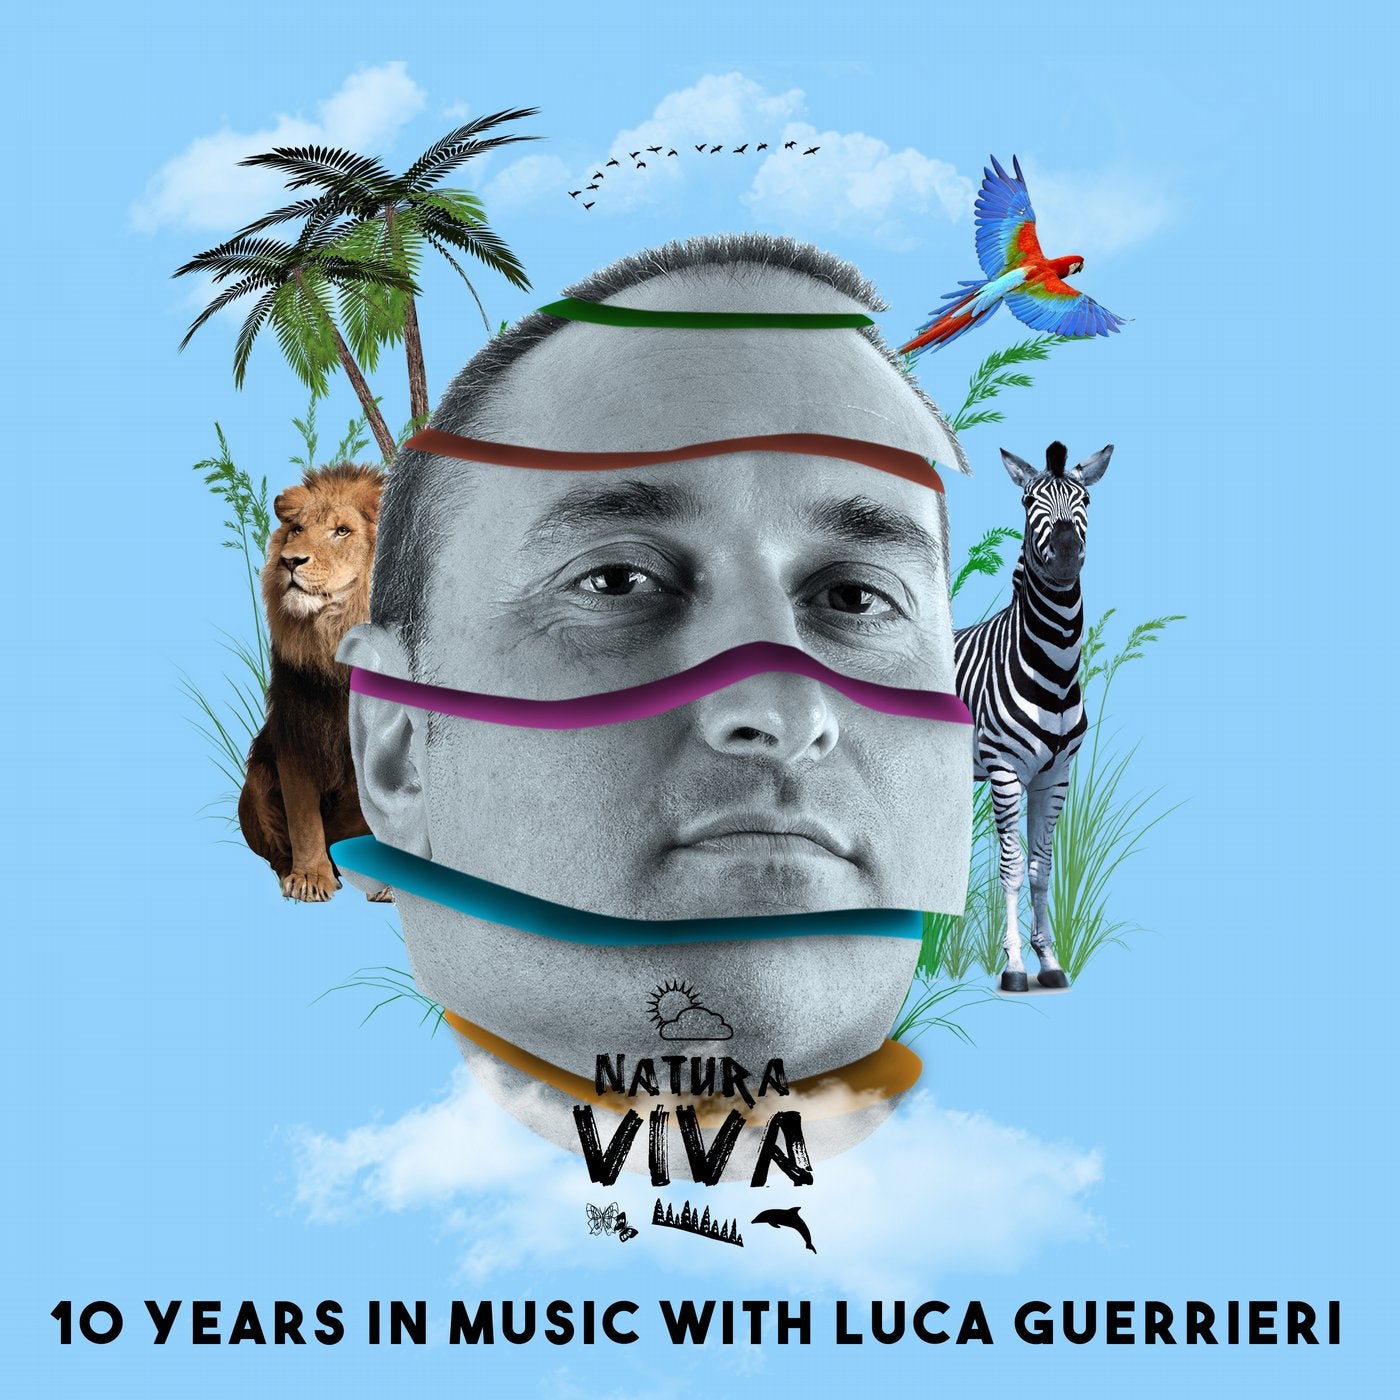 10 Years In Music With Luca Guerrieri (Selected And Mixed By Luca Guerrieri)